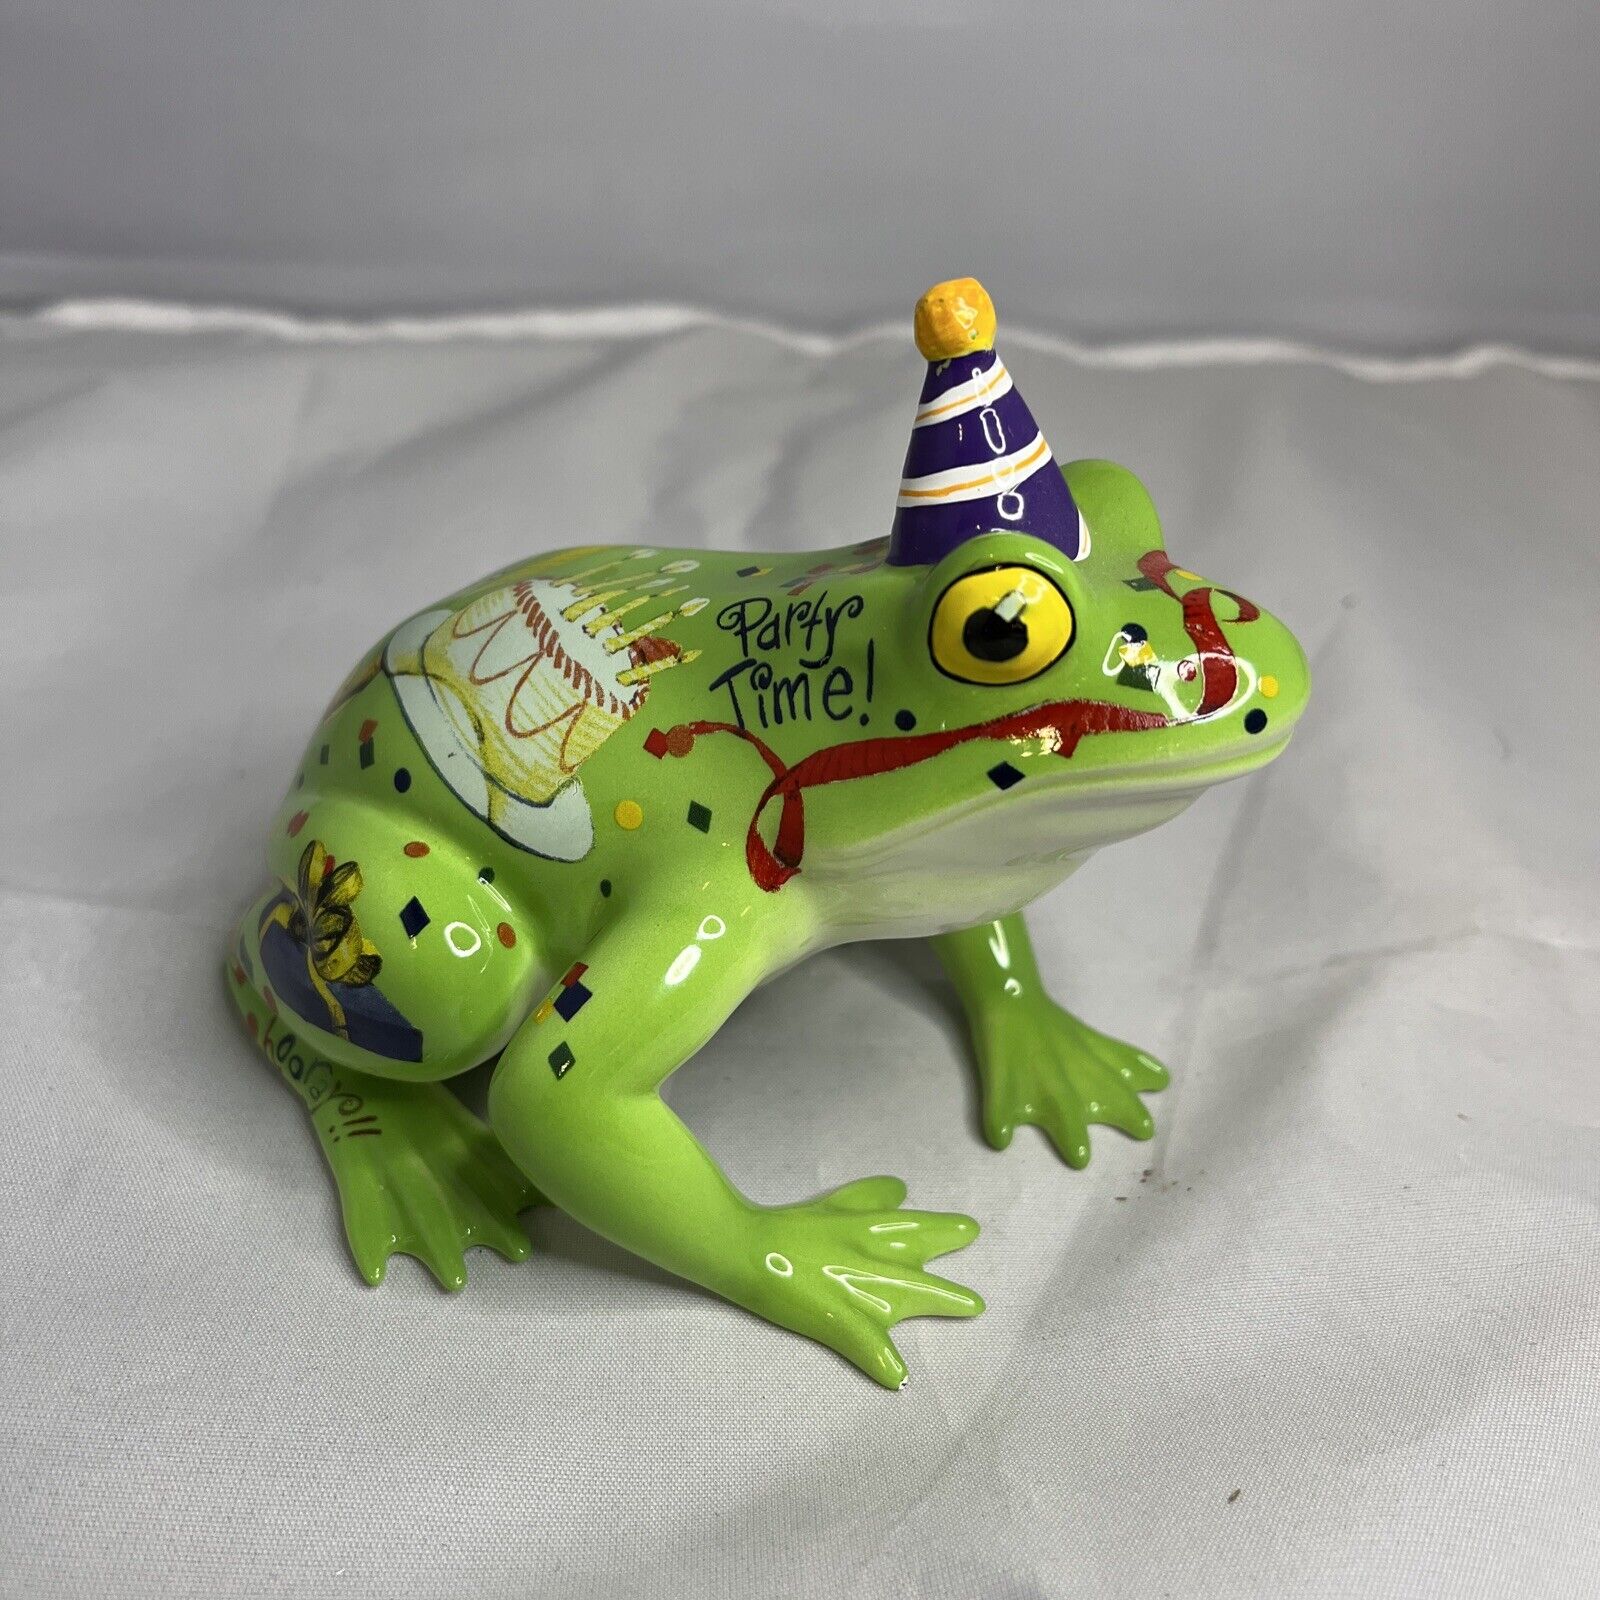 Fanciful Frogs By Westland Frog Figurine Hoppy Birthday Party Time Hat Happy 